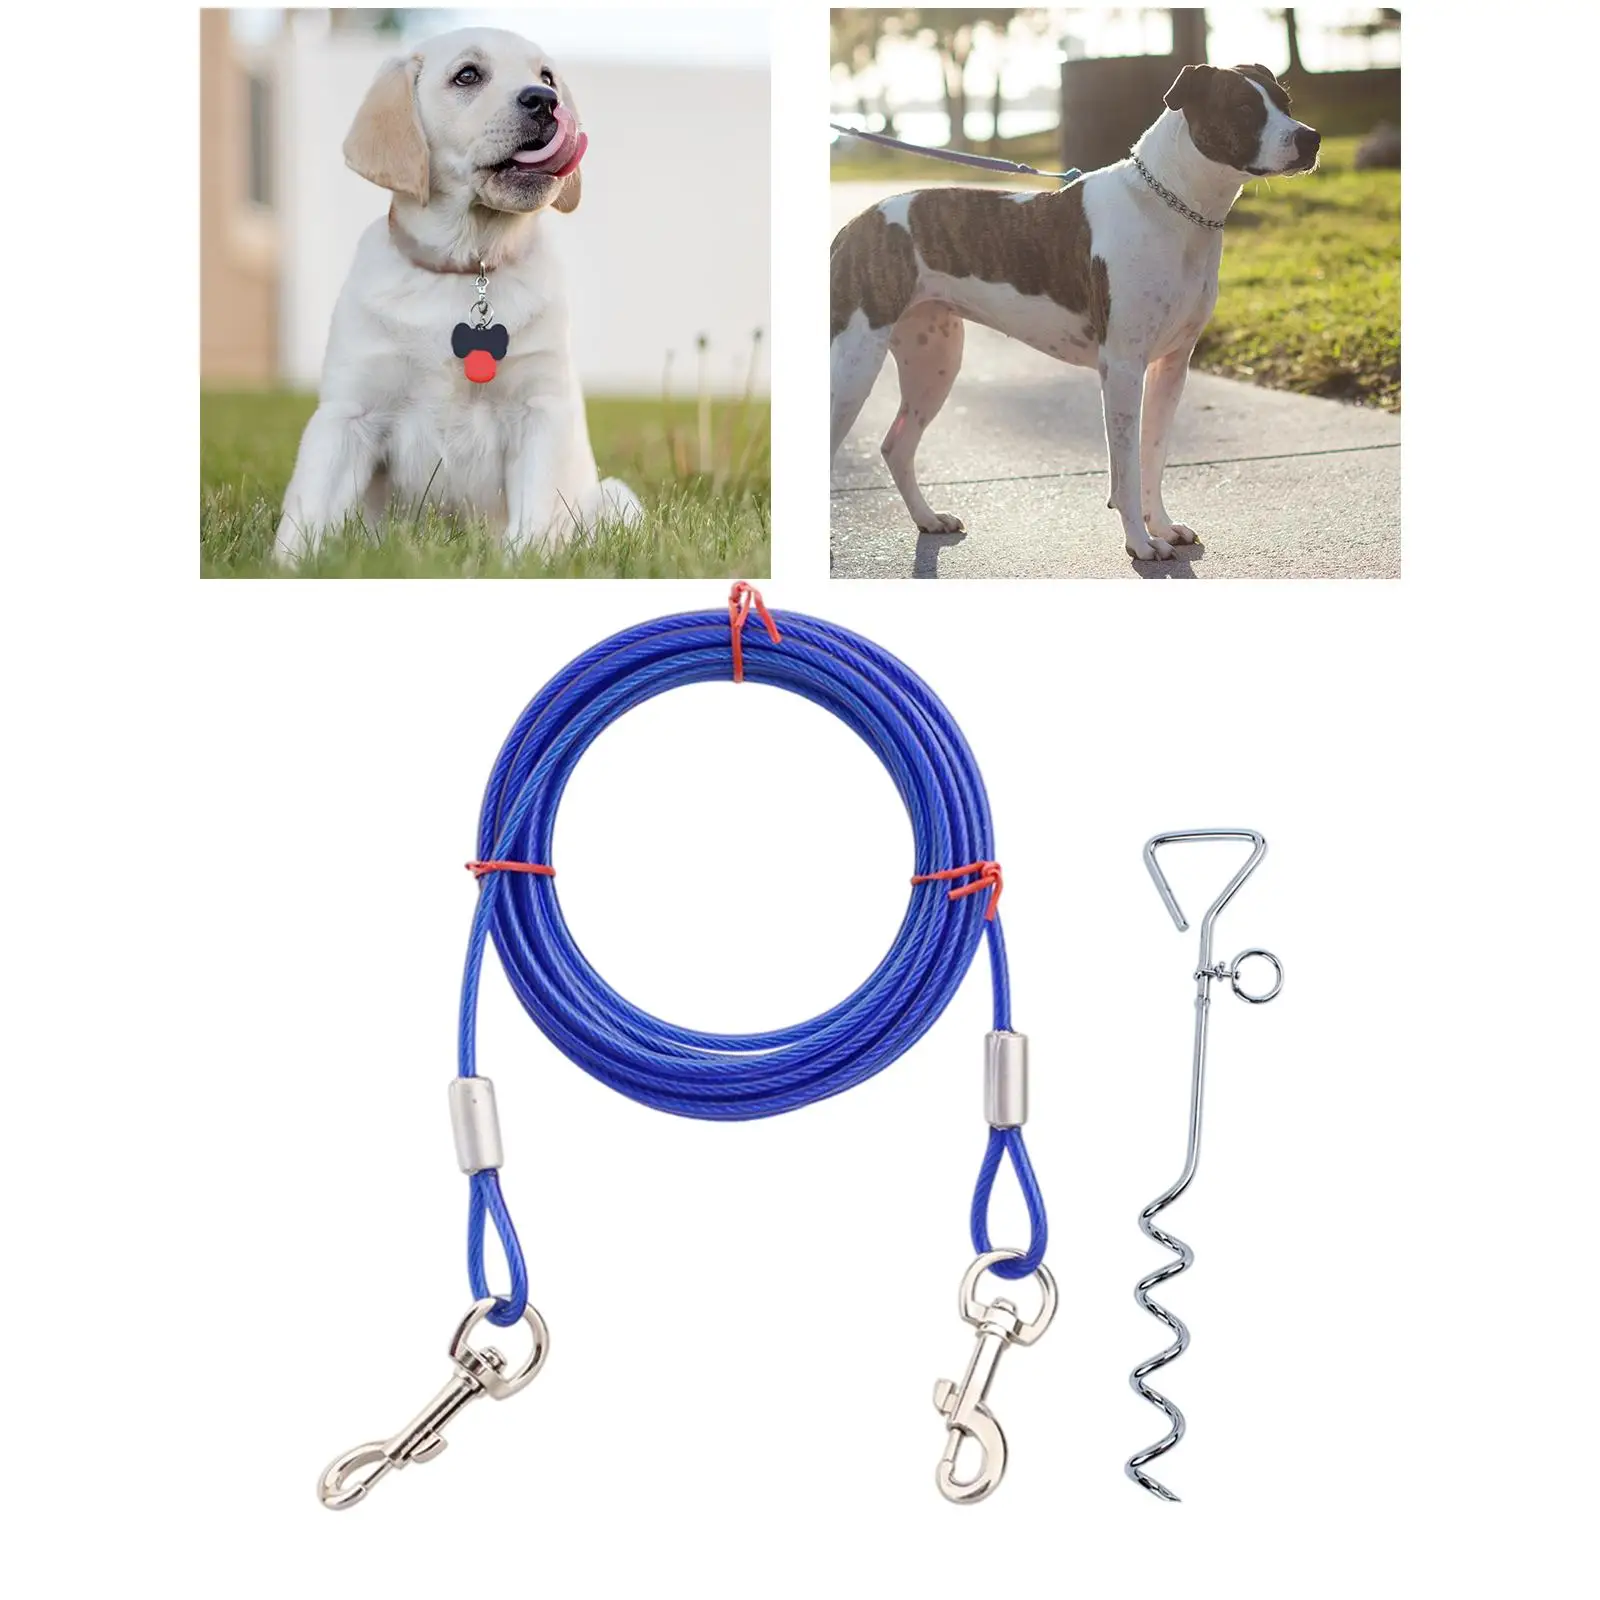 Dog Tie-Out and Stake Pets Anti Wrap Knotting Training Behavior Aids for Camping Yard Outside Beach